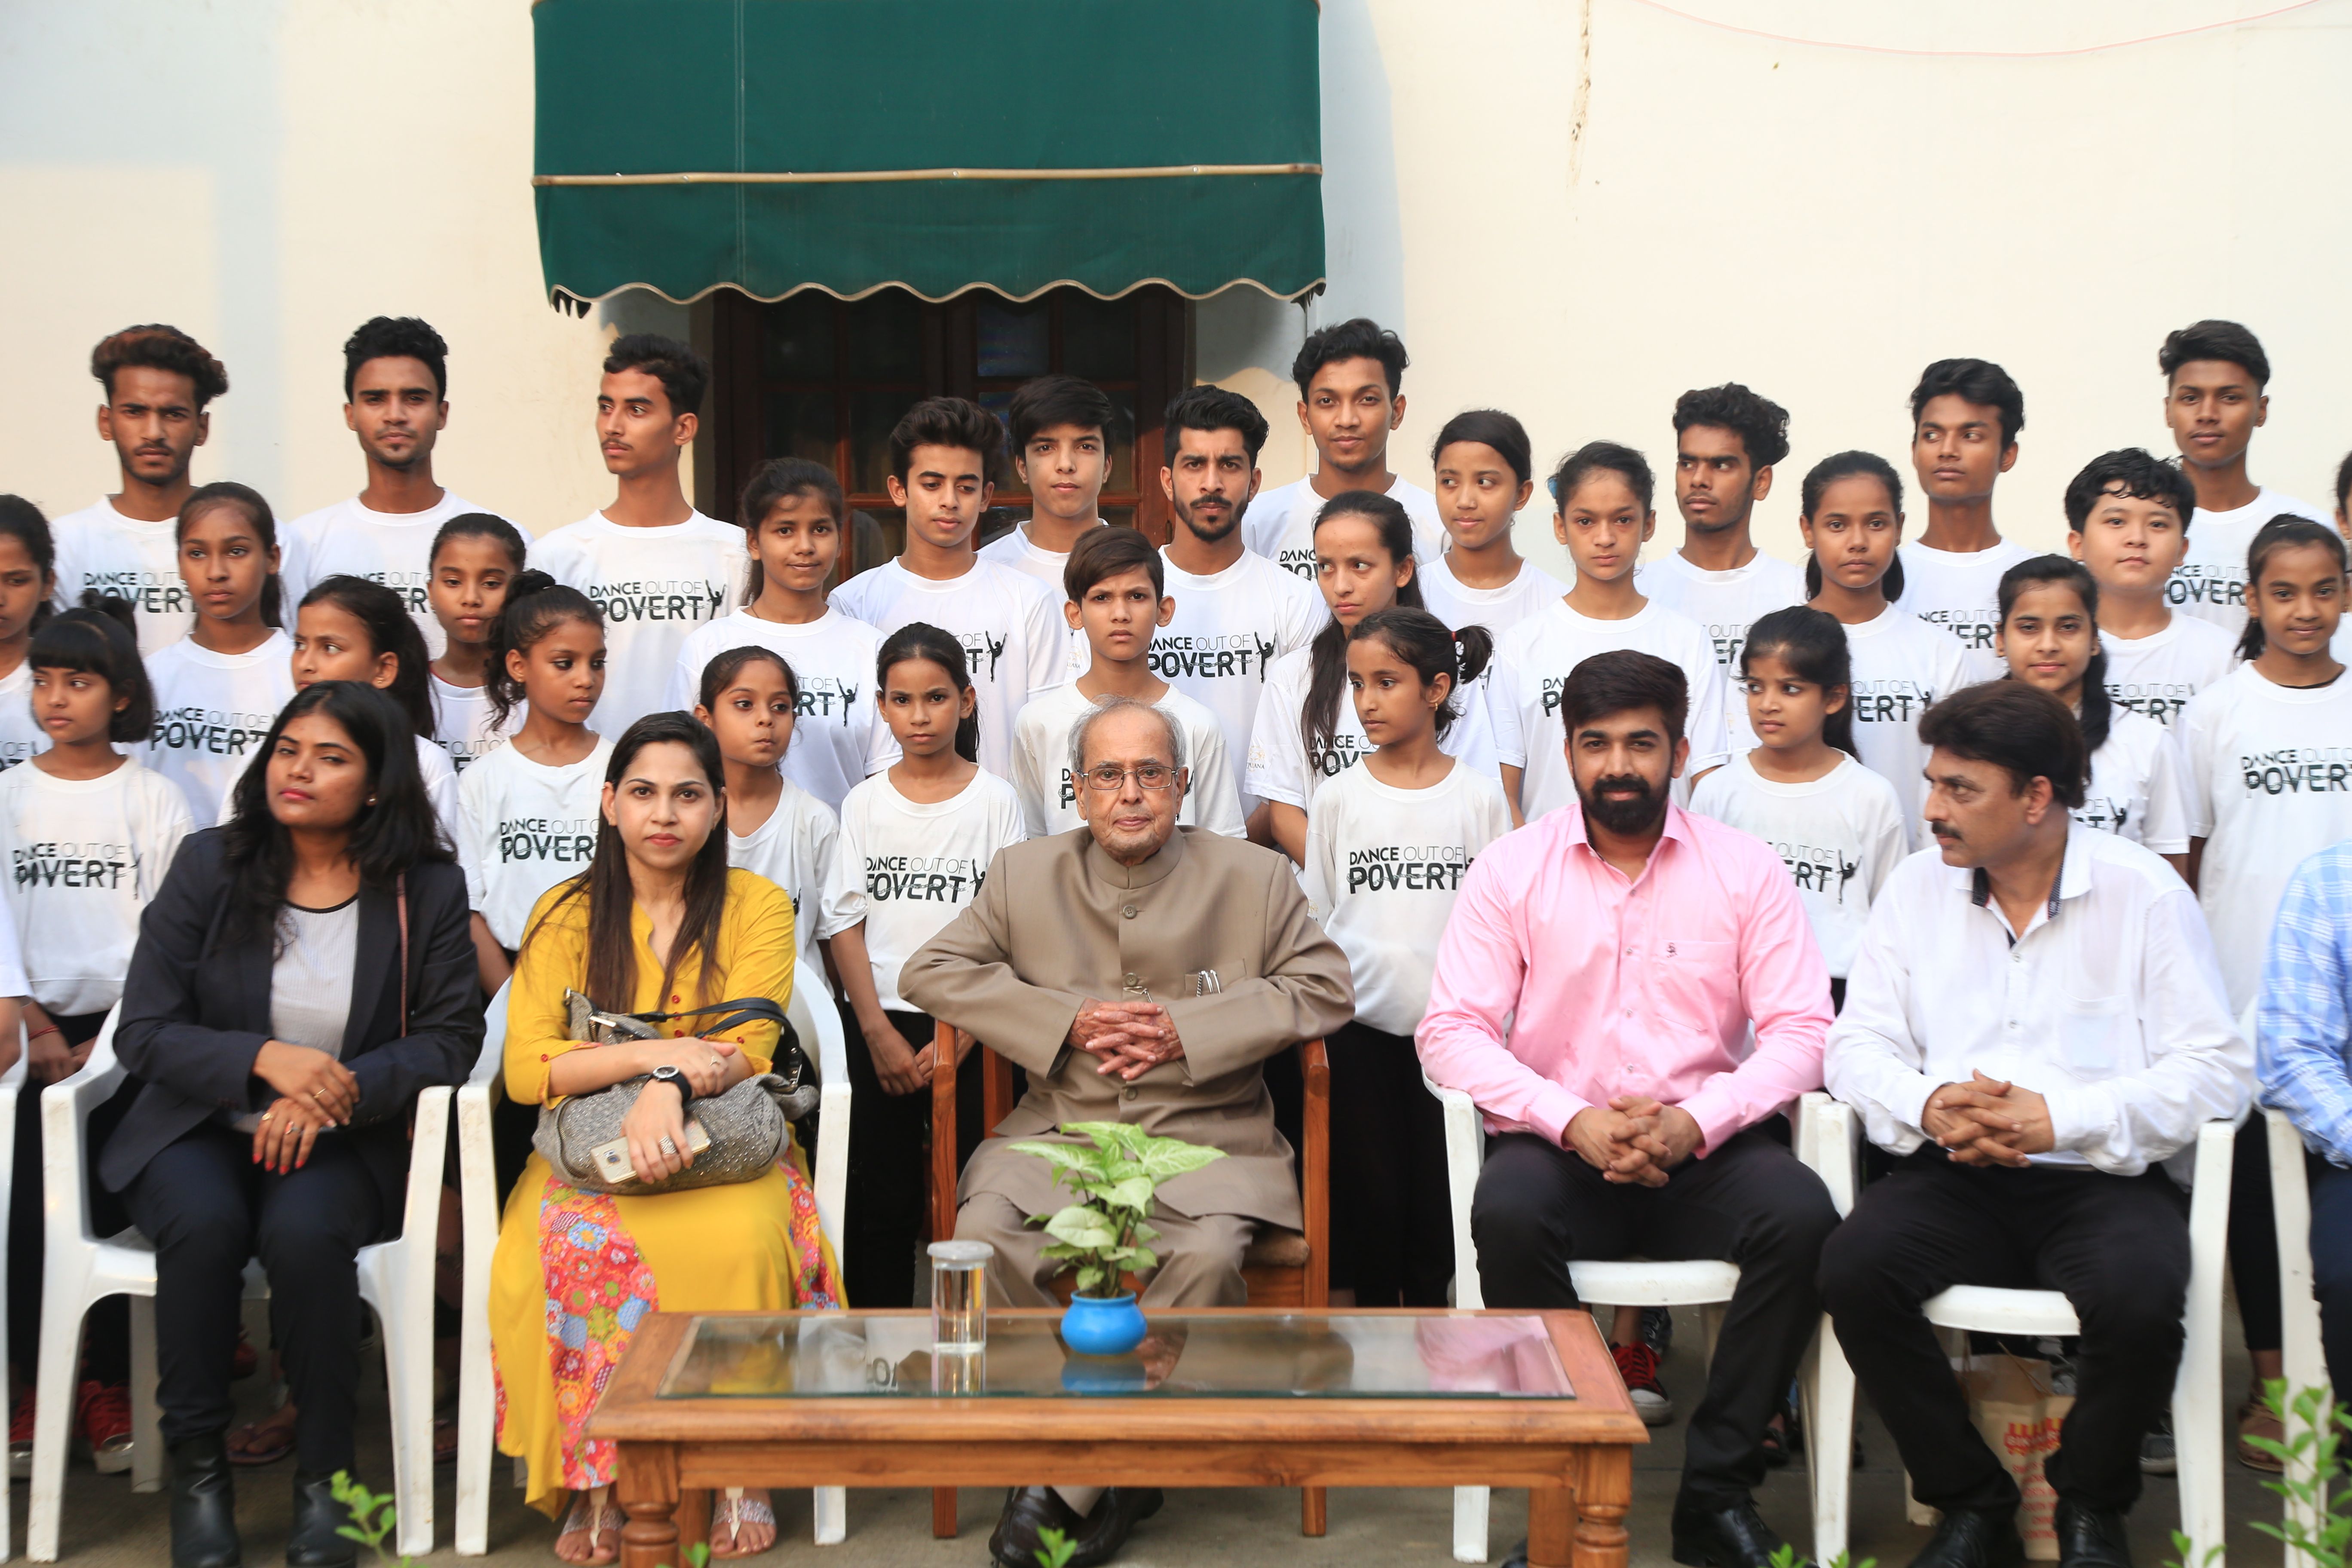 Dance out of poverty team with President Pranab Mukharjee